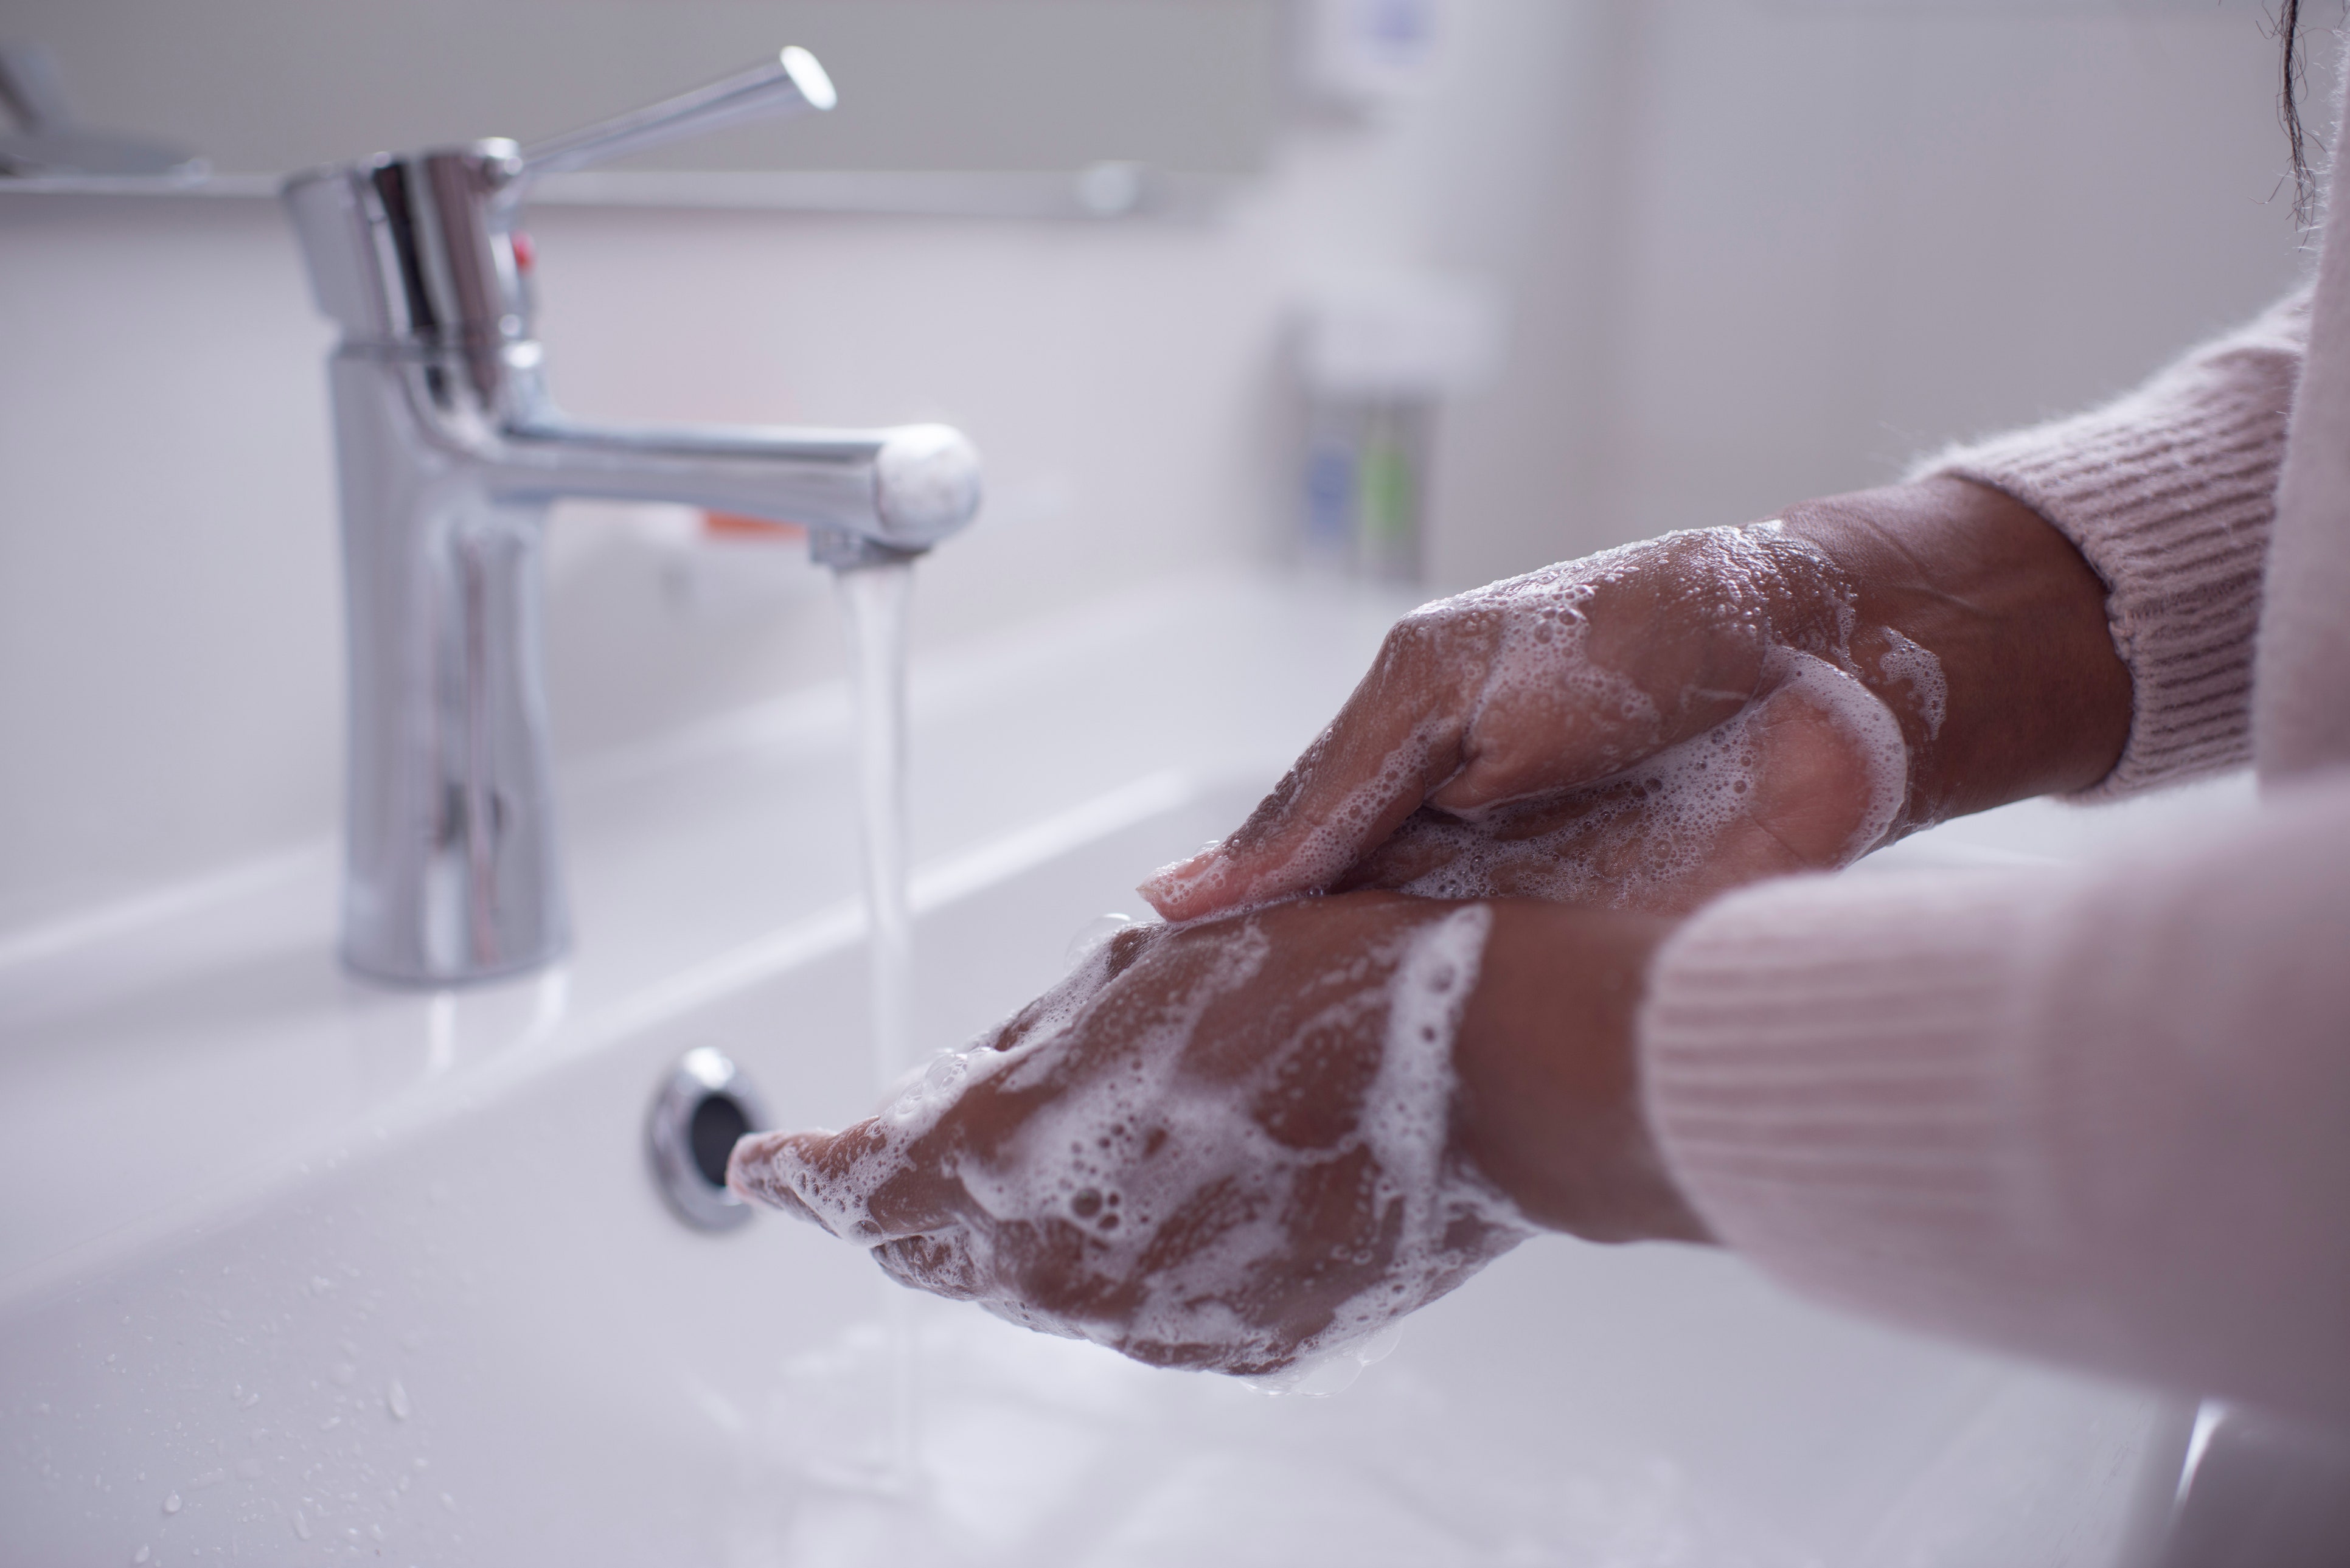 Popular hand soap facing recall due to bacterial contamination issues